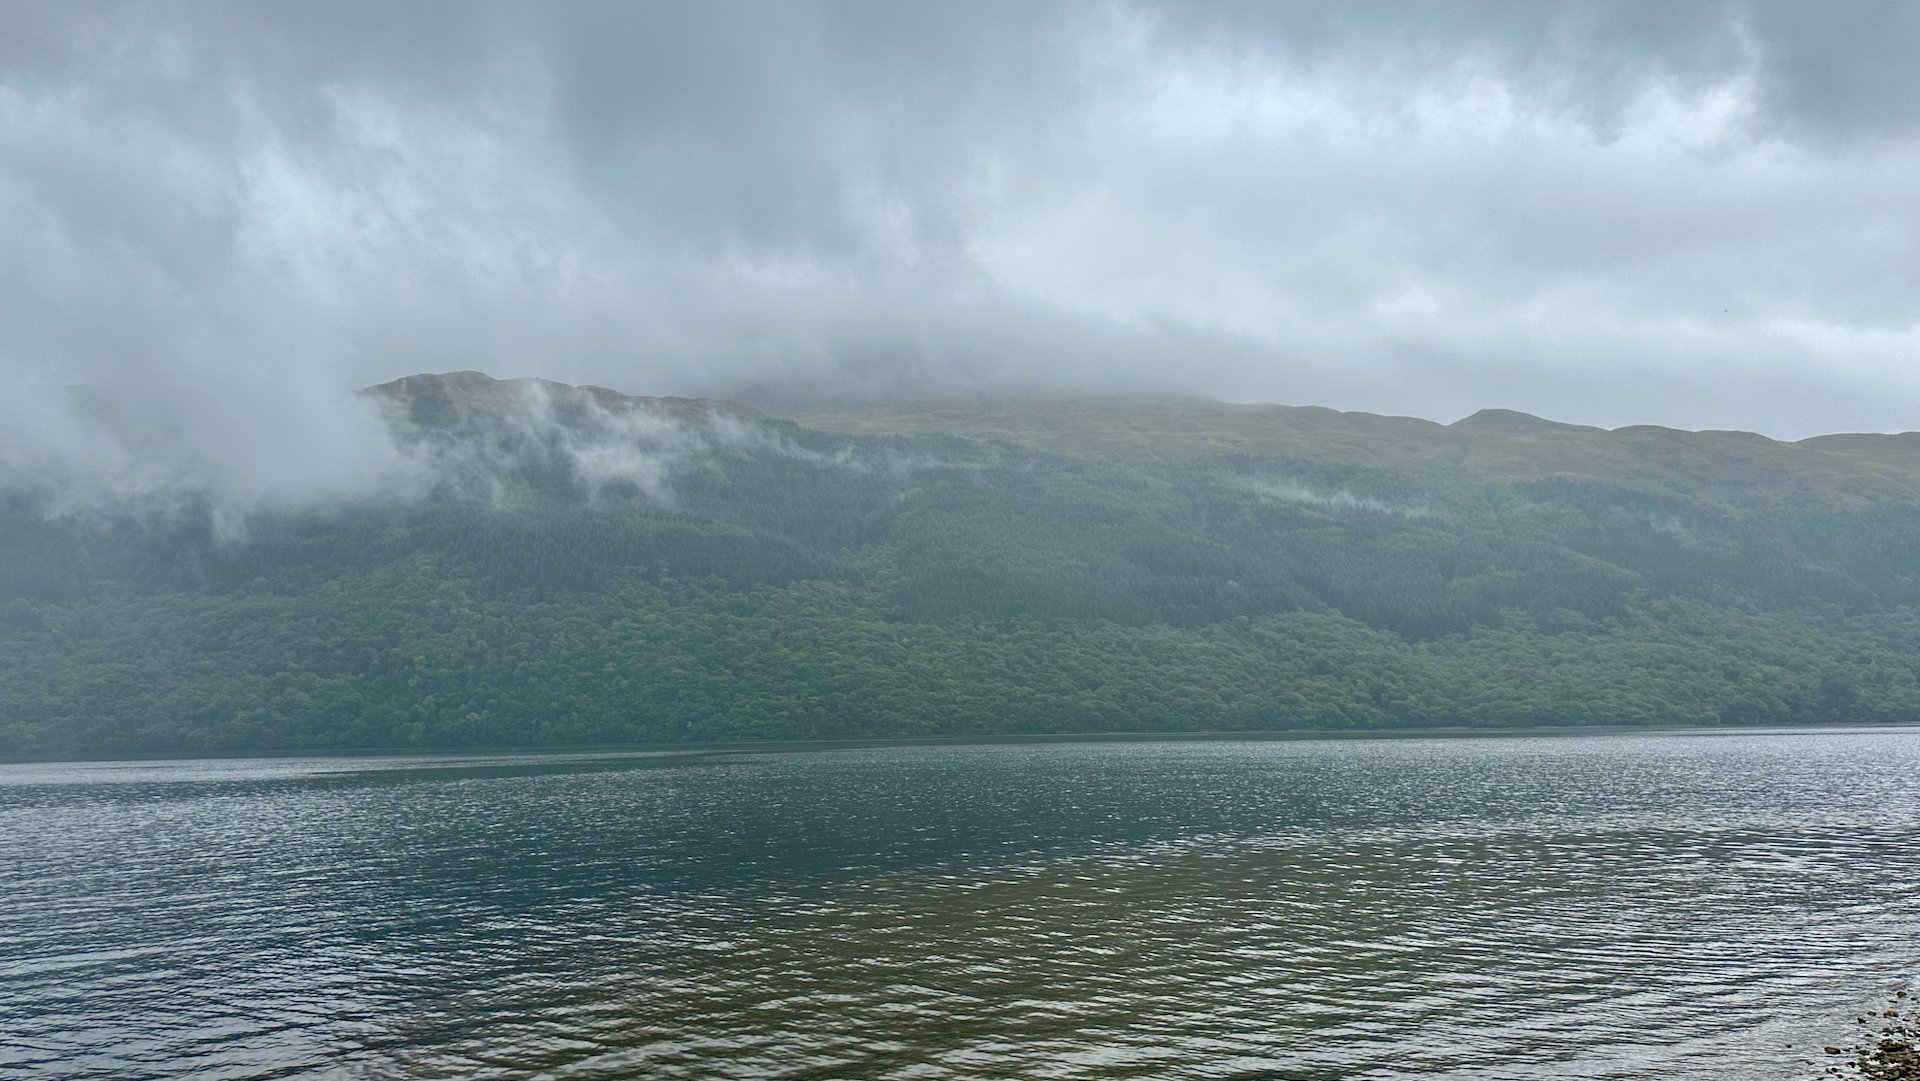  Looking across Loch Lommand. Ben Lommand is up there somewhere in the clouds.  